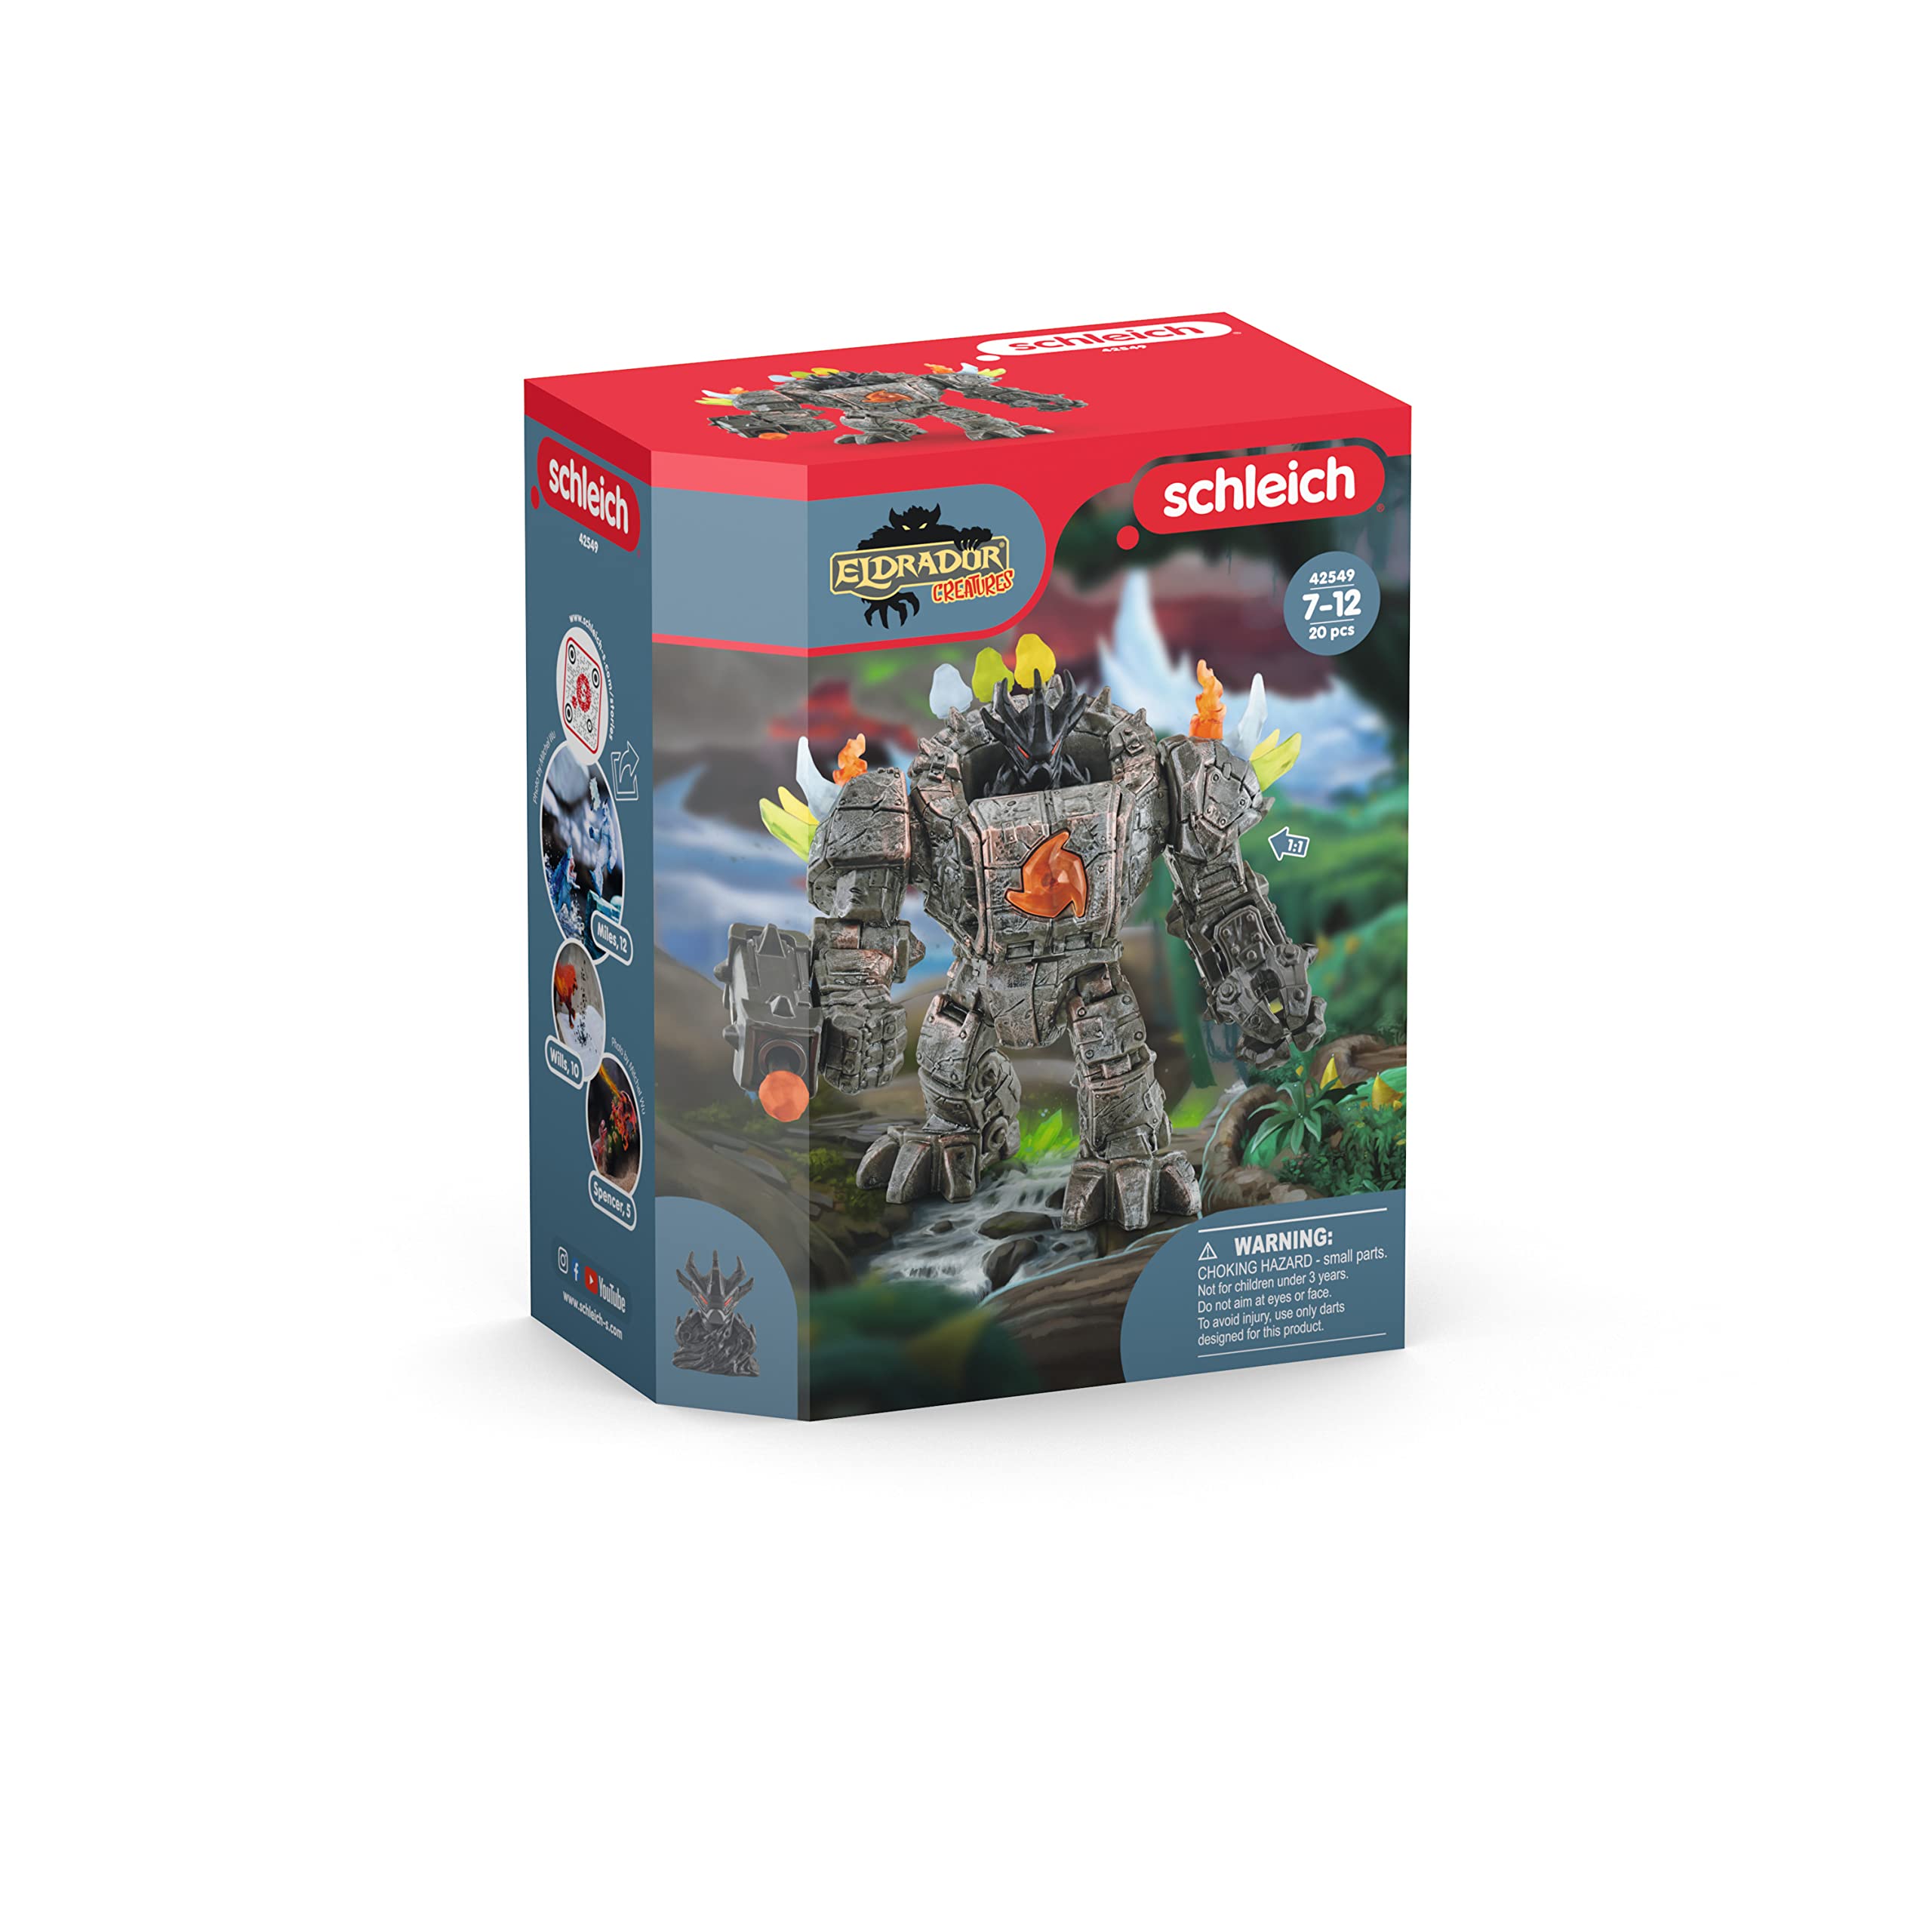 Schleich Eldrador 20-Piece Robot Toy Playset for Boys and Girls Ages 7+, Master Robot with Mini Creature, Multi